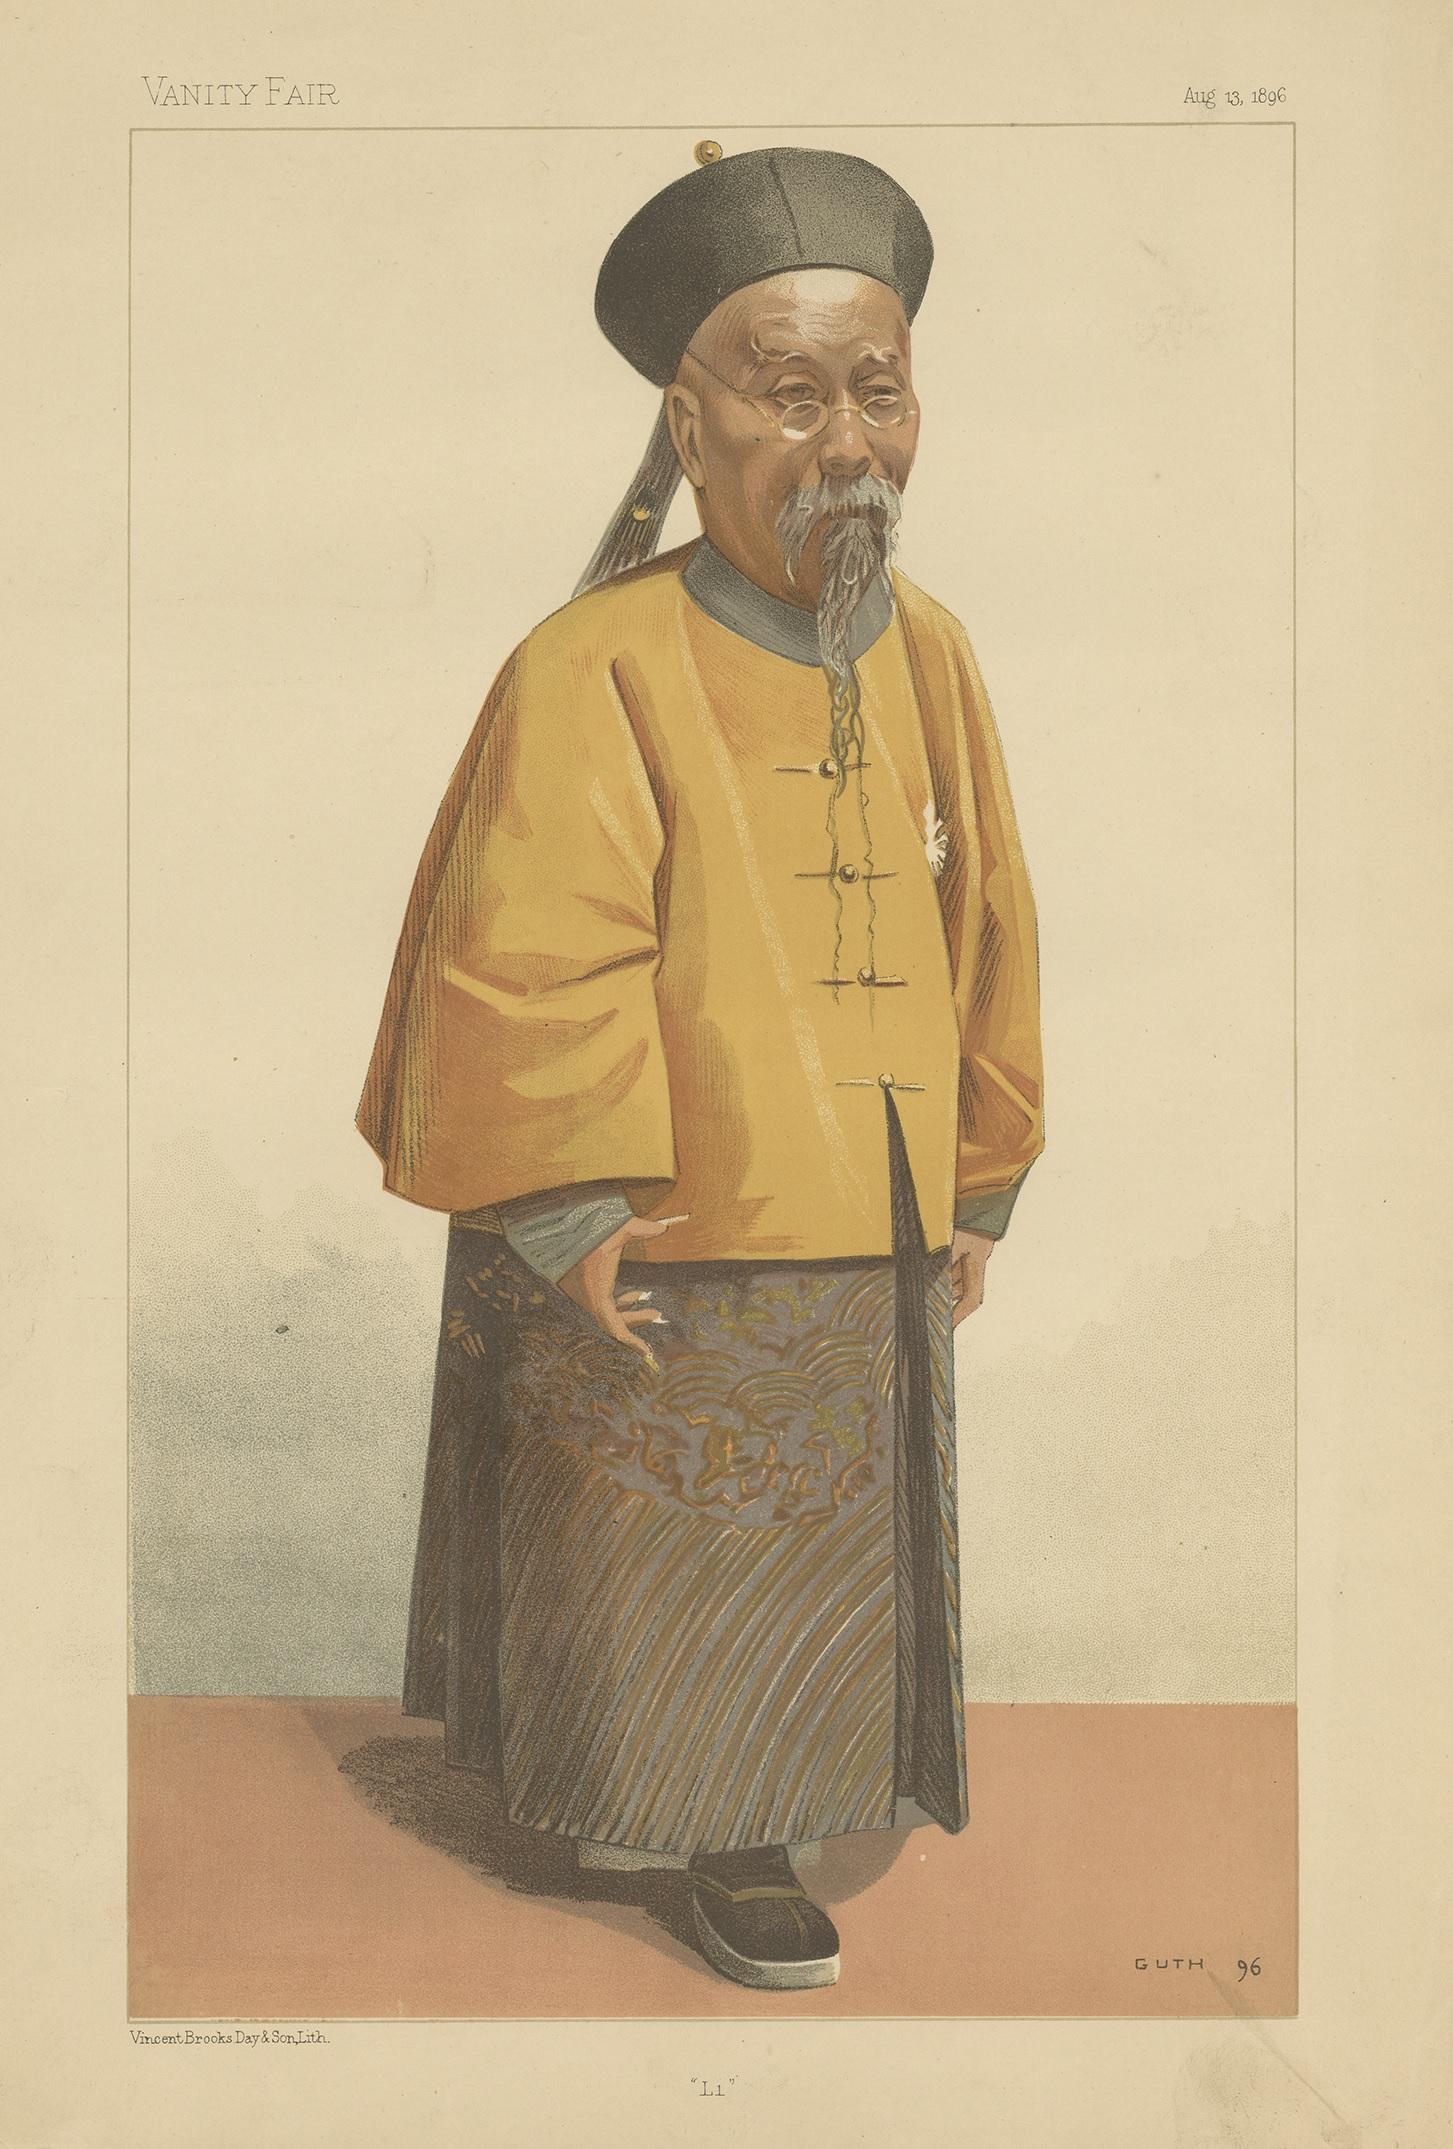 The image is a caricature of Li Hongzhang, a prominent Chinese statesman, military general, and diplomat of the Qing dynasty. It is dated August 13, 1896, and comes from the magazine 